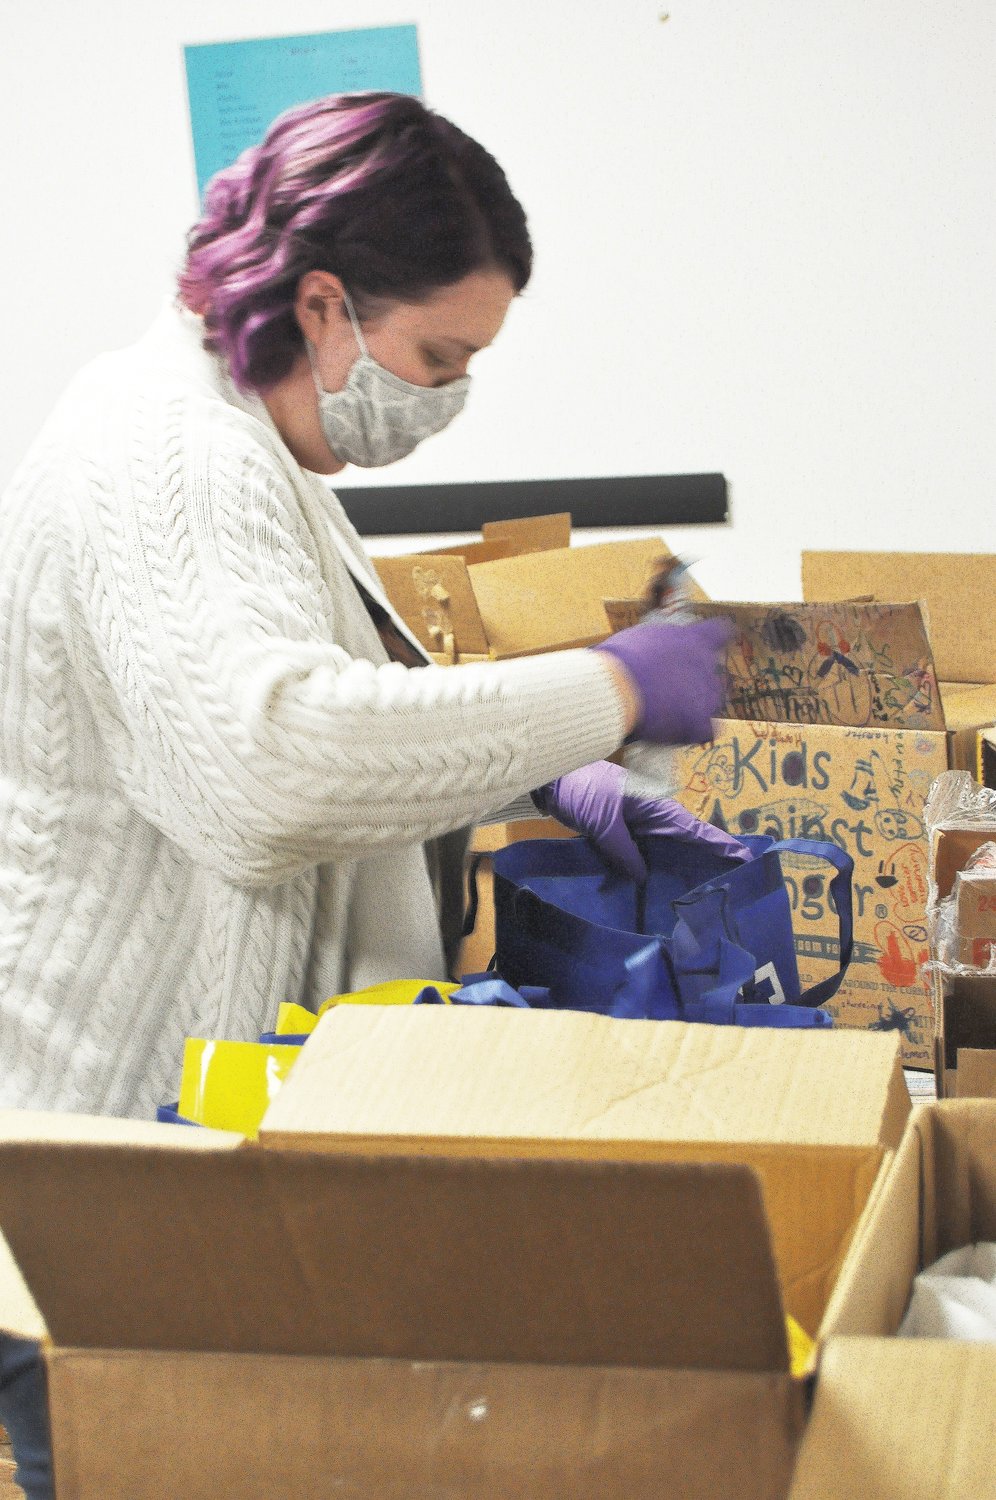 Kelsey Norris packs a bag of food for the Nourish program Thursday at the Montgomery County Youth Service Bureau. Norris and her husband, Matt, the daughter and son-in-law of Youth Service Bureau Executive Director Karen Branch, volunteered to pack this week's shipment to relieve employees who have done the packing since the offices closed due to the COVID-19 outbreak.